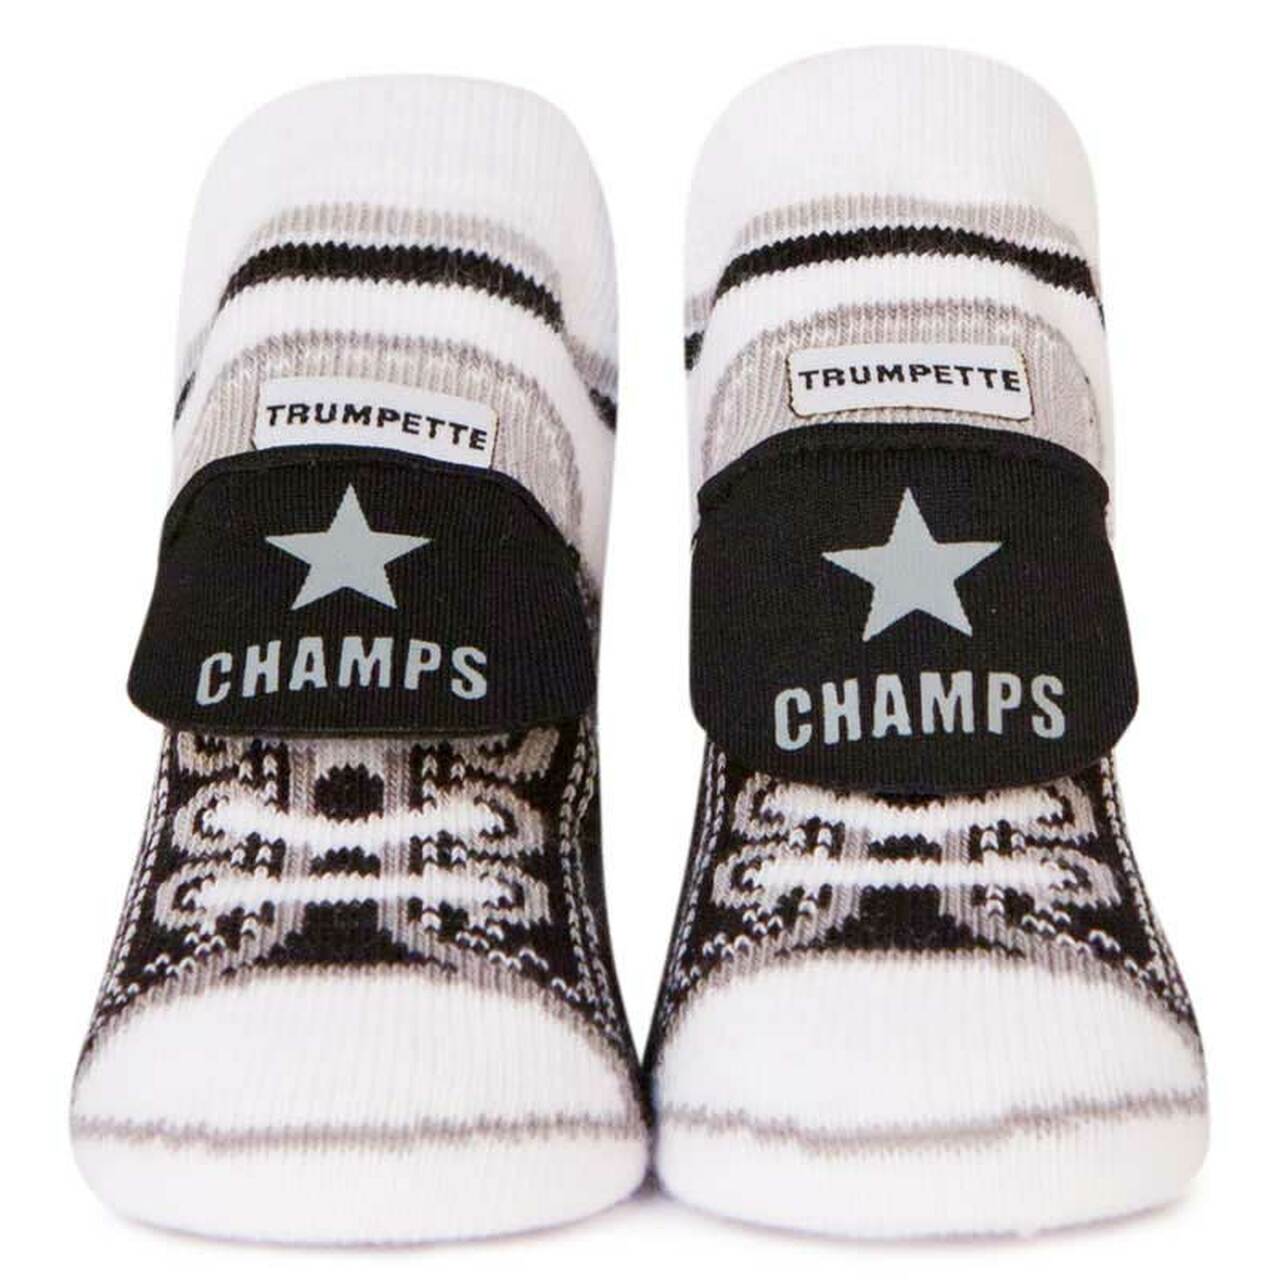 Champs Baby socks with grip - set of 6  - Size 0-12 Months - Gift box included